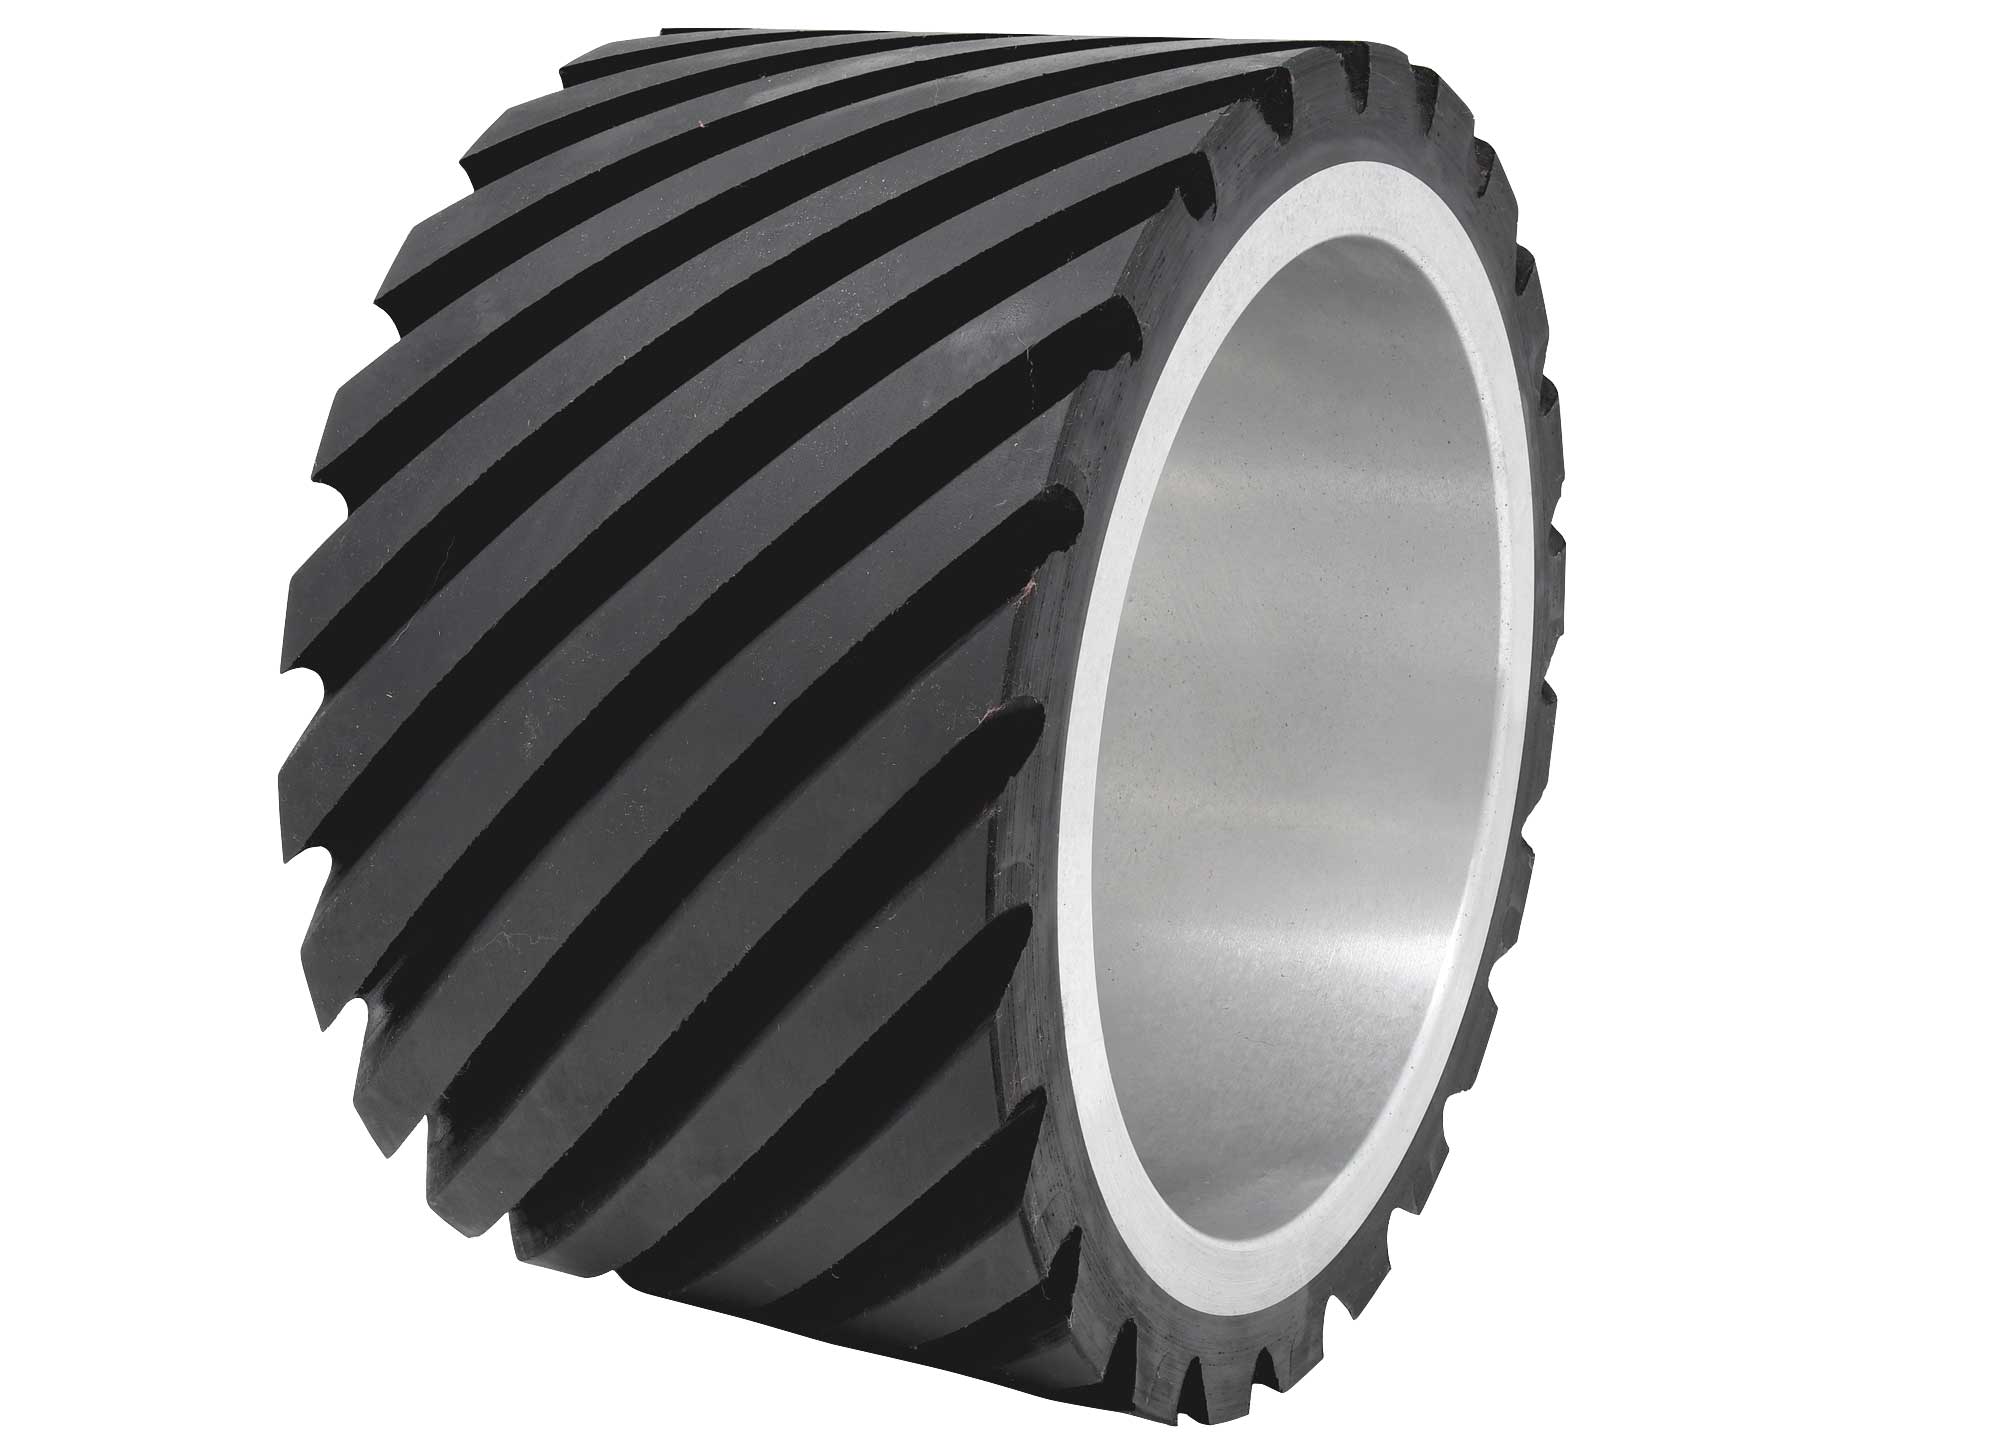 802-4-S-90 Serrated Contact Wheel, 7 x 4, 90 duro